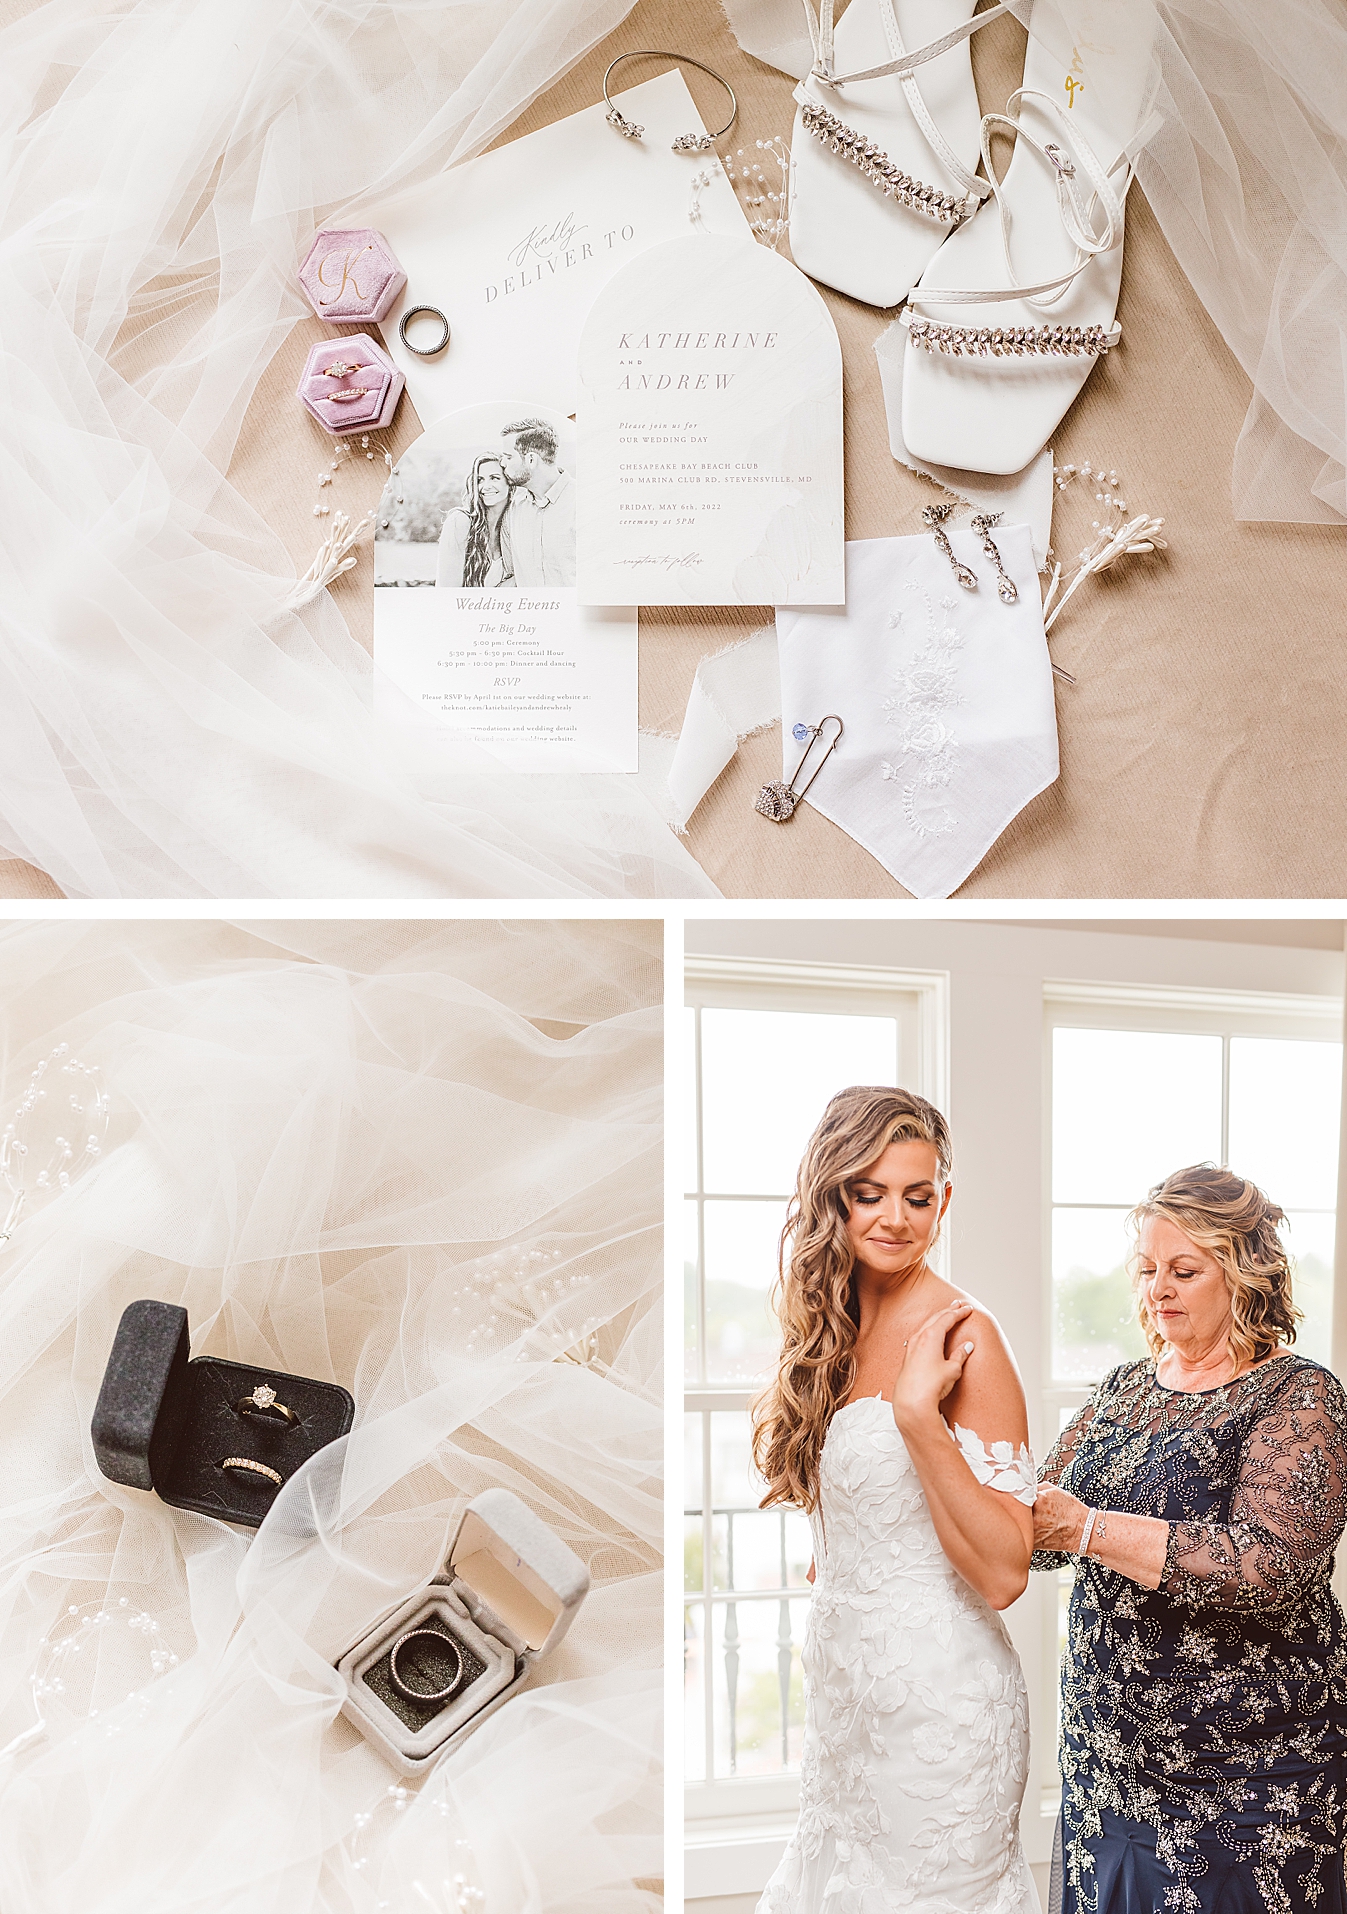 Elegant invitation suite with bridal shoes and jewelry | bride and groom’s parent’s ring boxes with wedding rings | bride’s mother helping her put on wedding dress | Brooke Michelle Photo